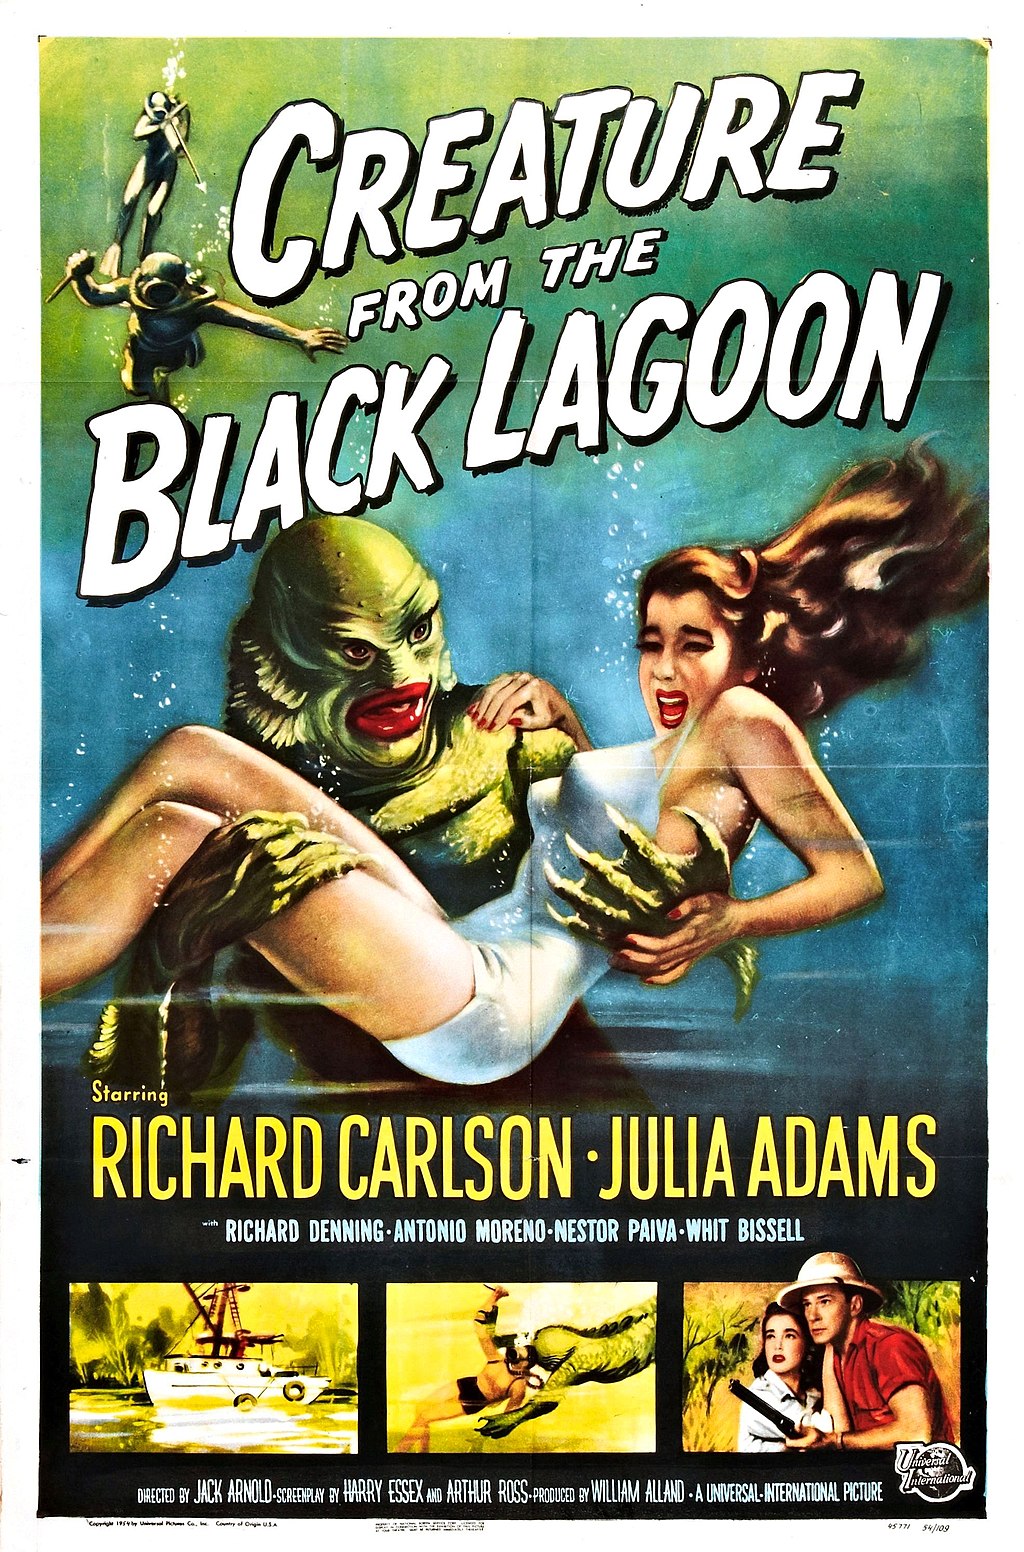 Creature From the Black Lagoon poster, by Reynold Brown, Public domain, via Wikimedia Commons https://commons.wikimedia.org/wiki/File:Creature_from_the_Black_Lagoon_poster.jpg